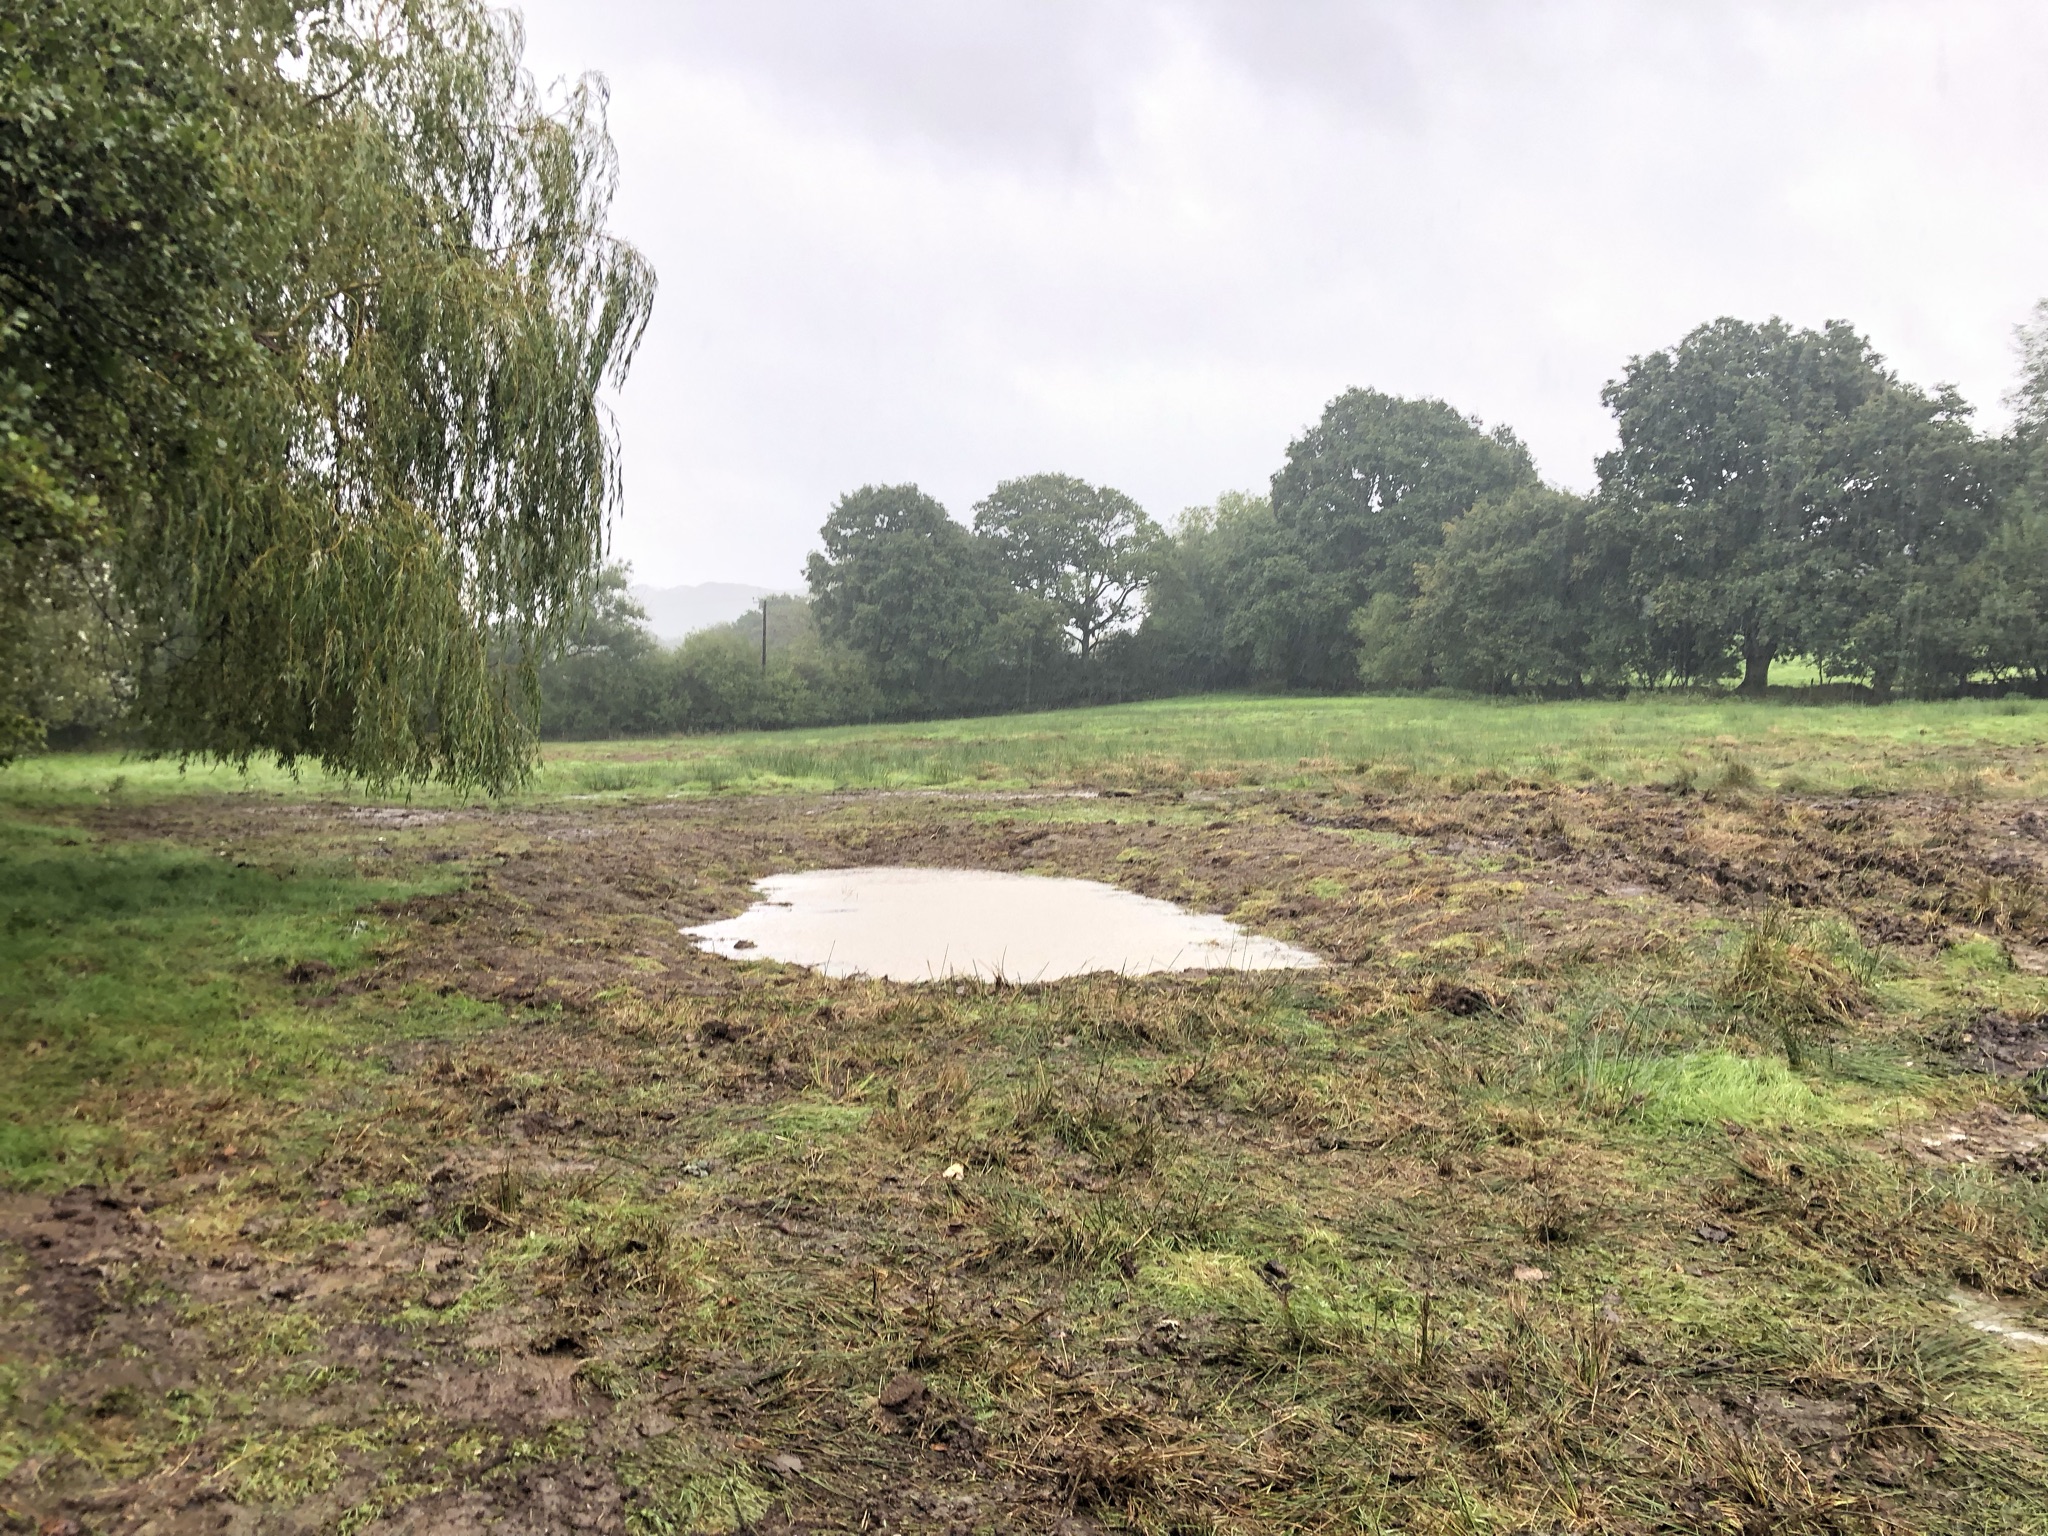 A scrape or small pool in a field filled with water.